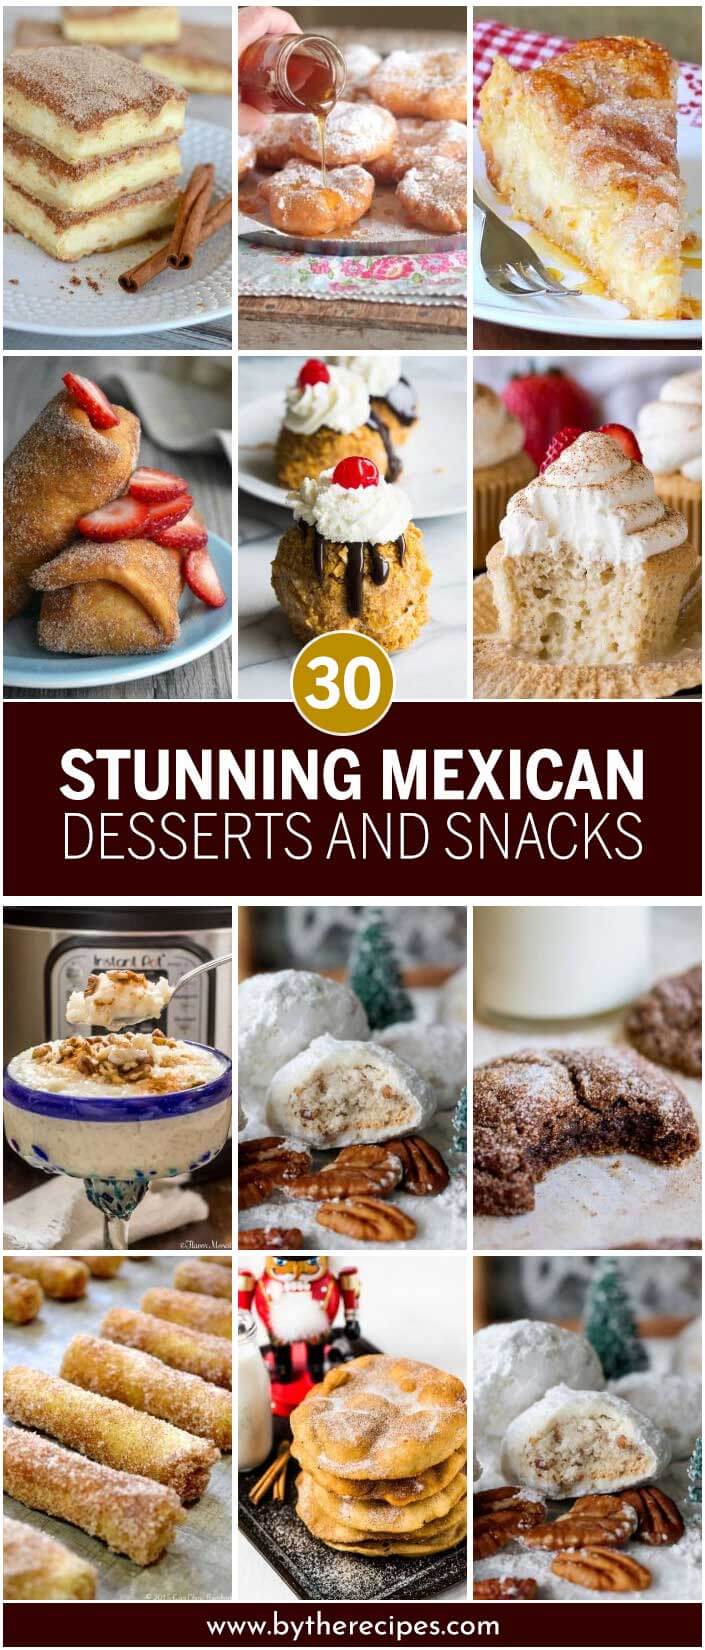 30 Stunning Mexican Desserts and Snacks